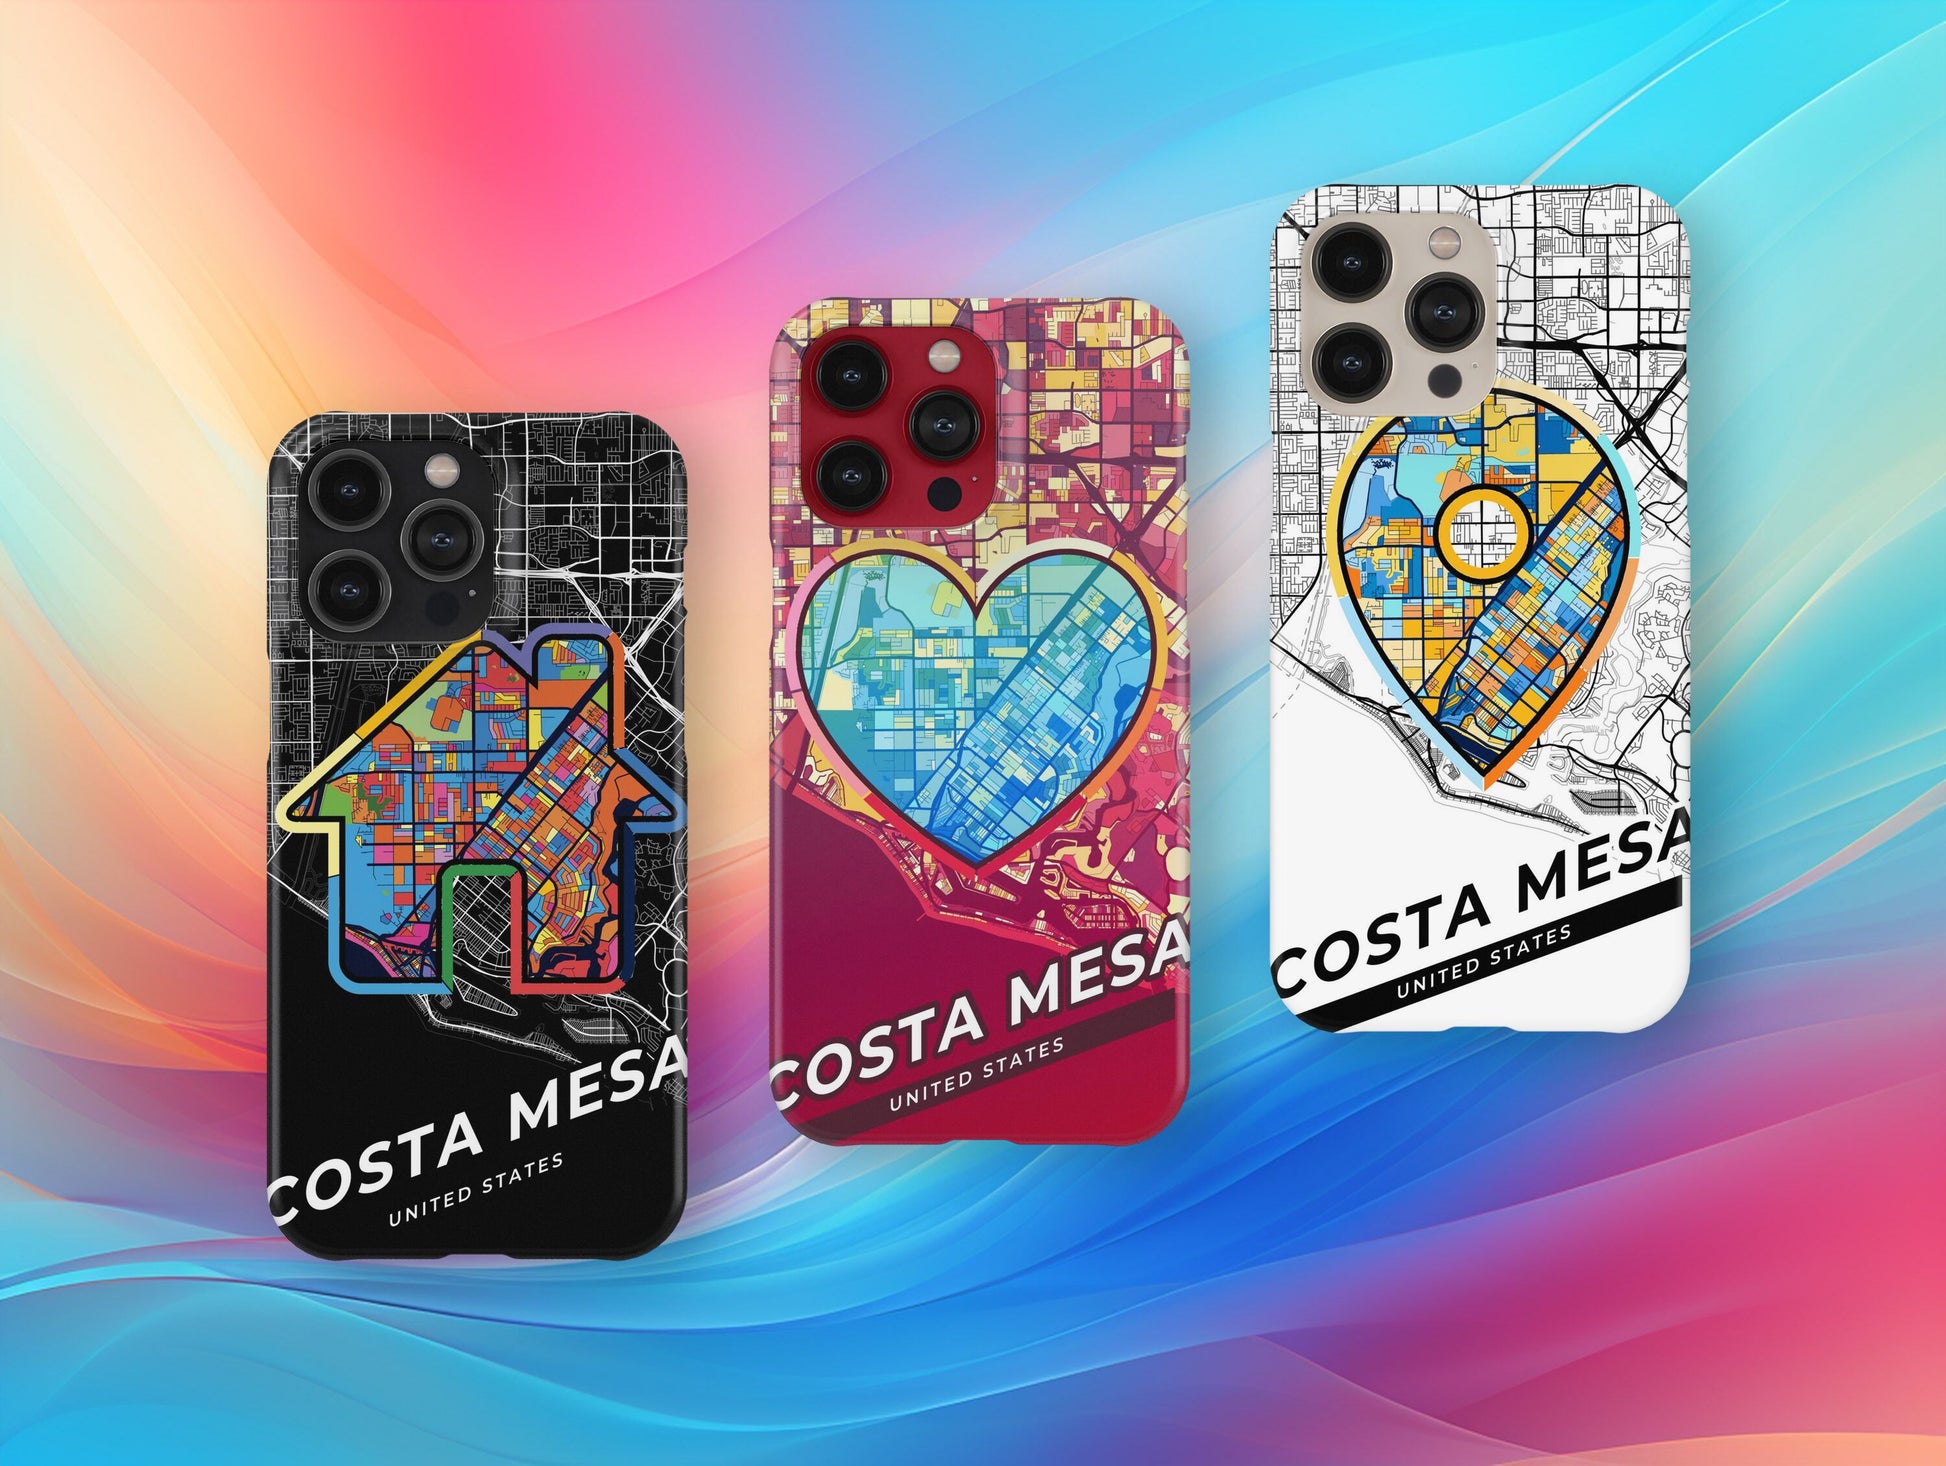 Costa Mesa California slim phone case with colorful icon. Birthday, wedding or housewarming gift. Couple match cases.